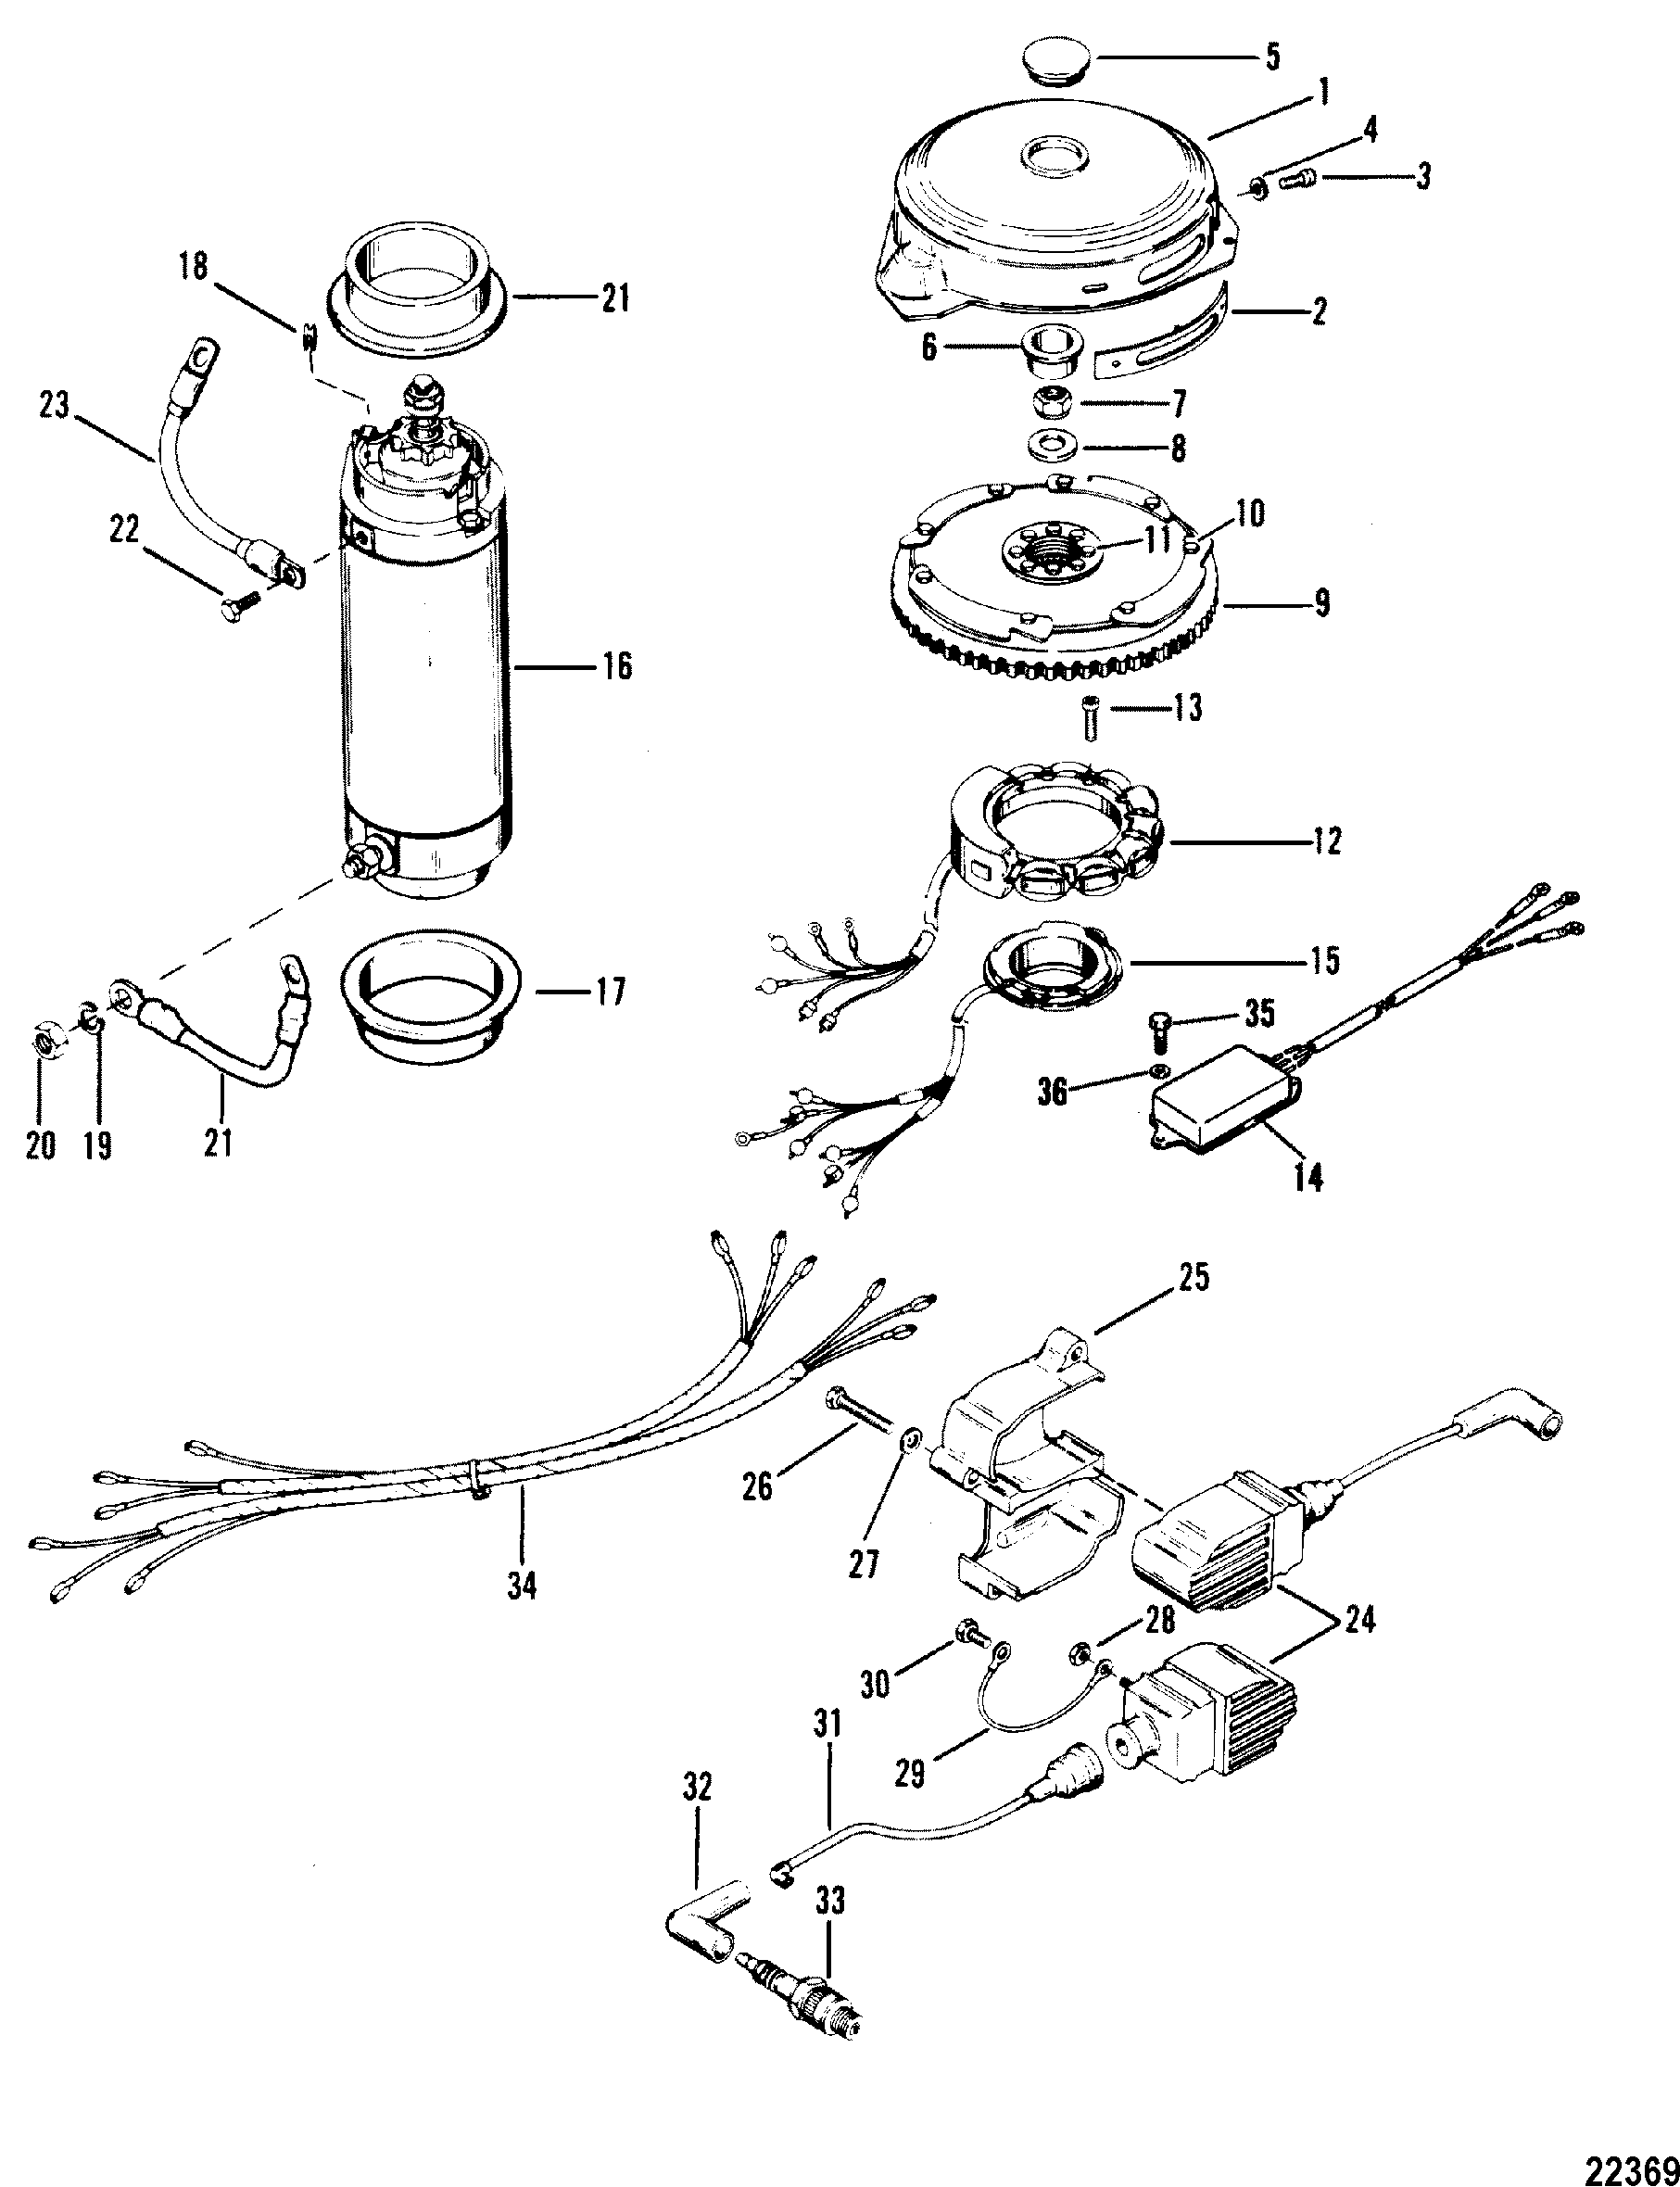 FLYWHEEL, STARTER MOTOR AND IGNITION COILS